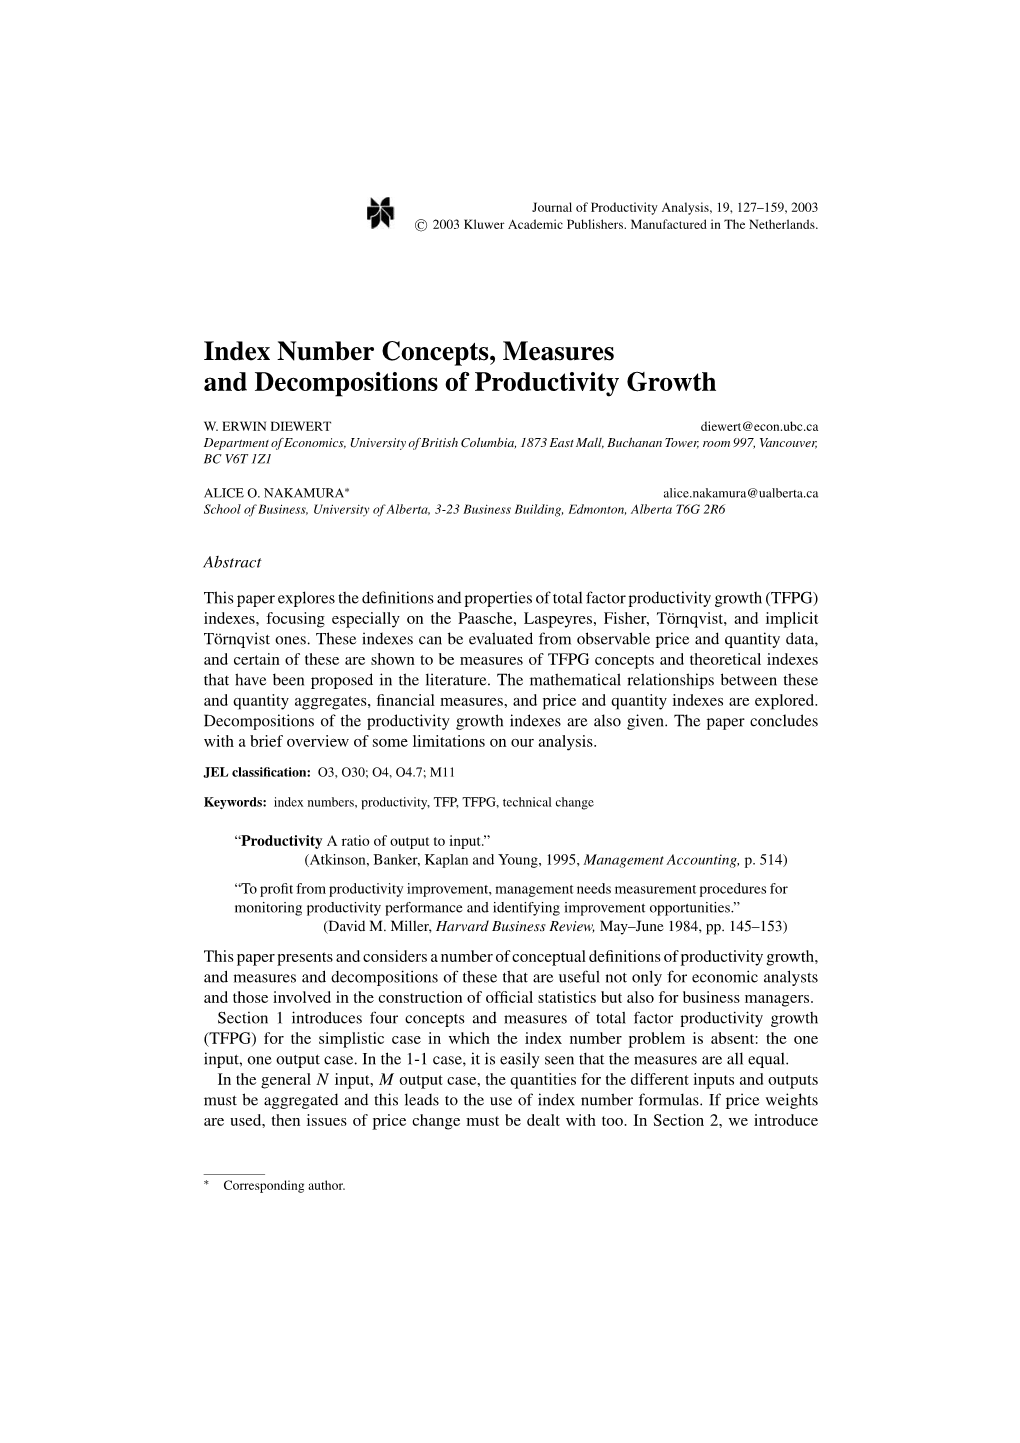 Index Number Concepts, Measures and Decompositions of Productivity Growth